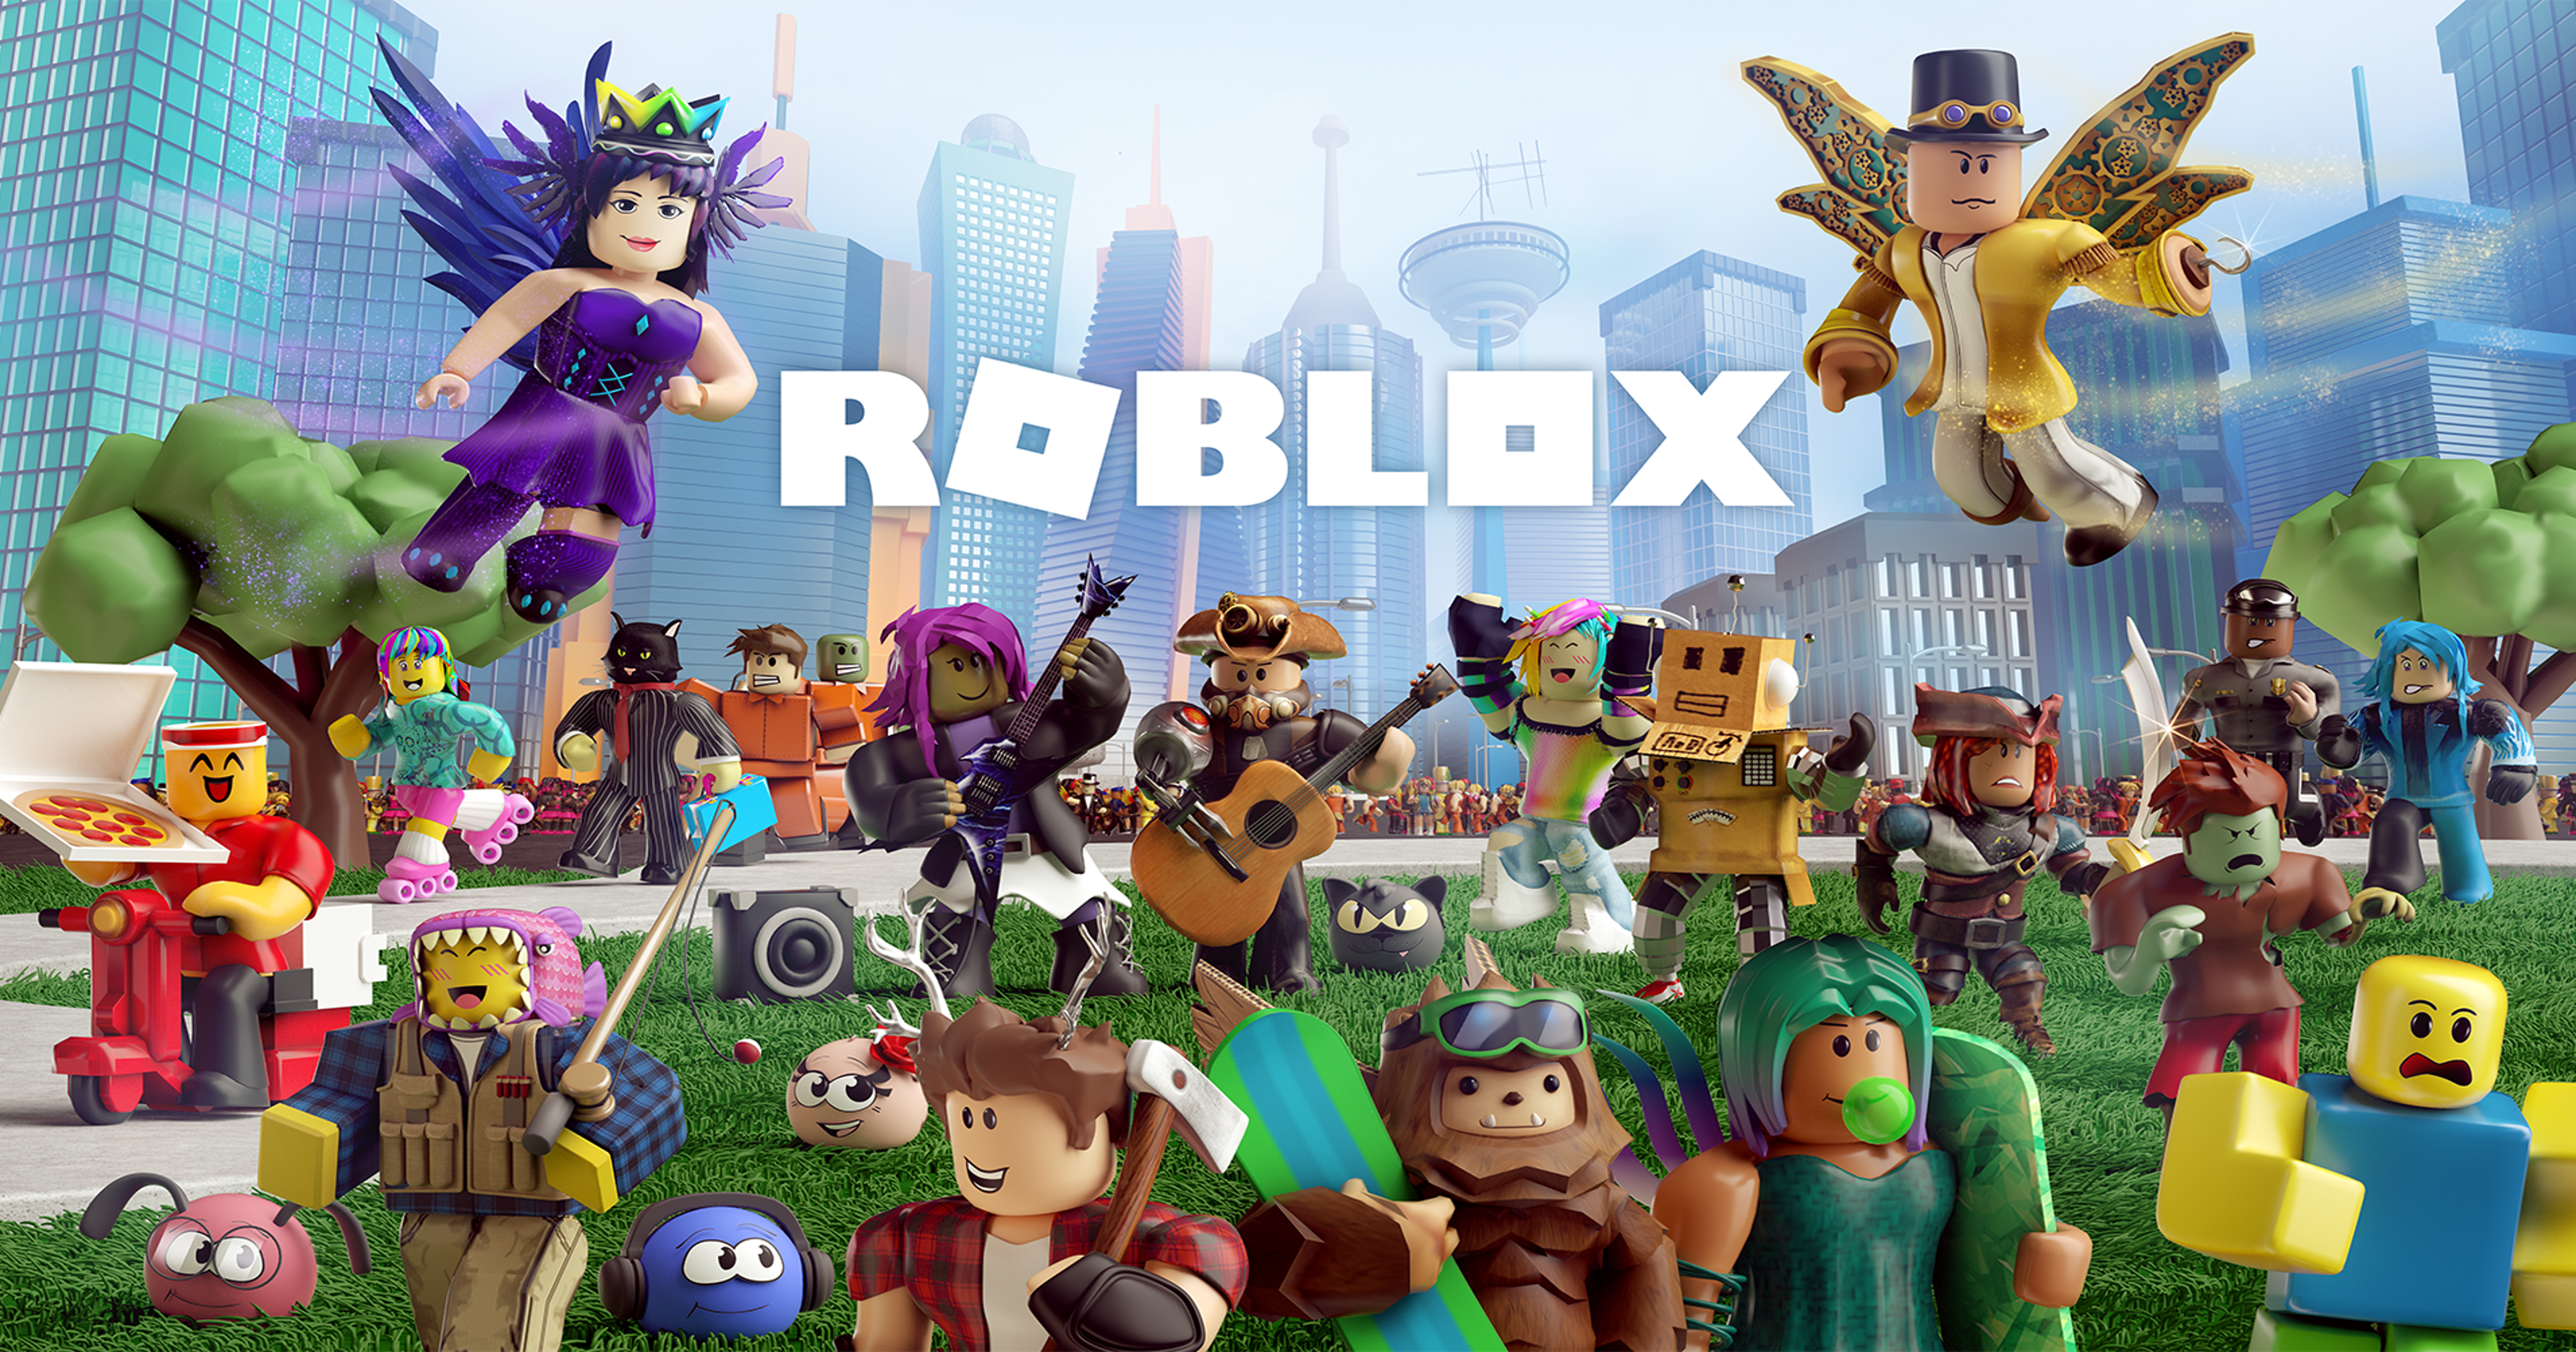 Roblox kids game shows character being sexually violated, mom warns